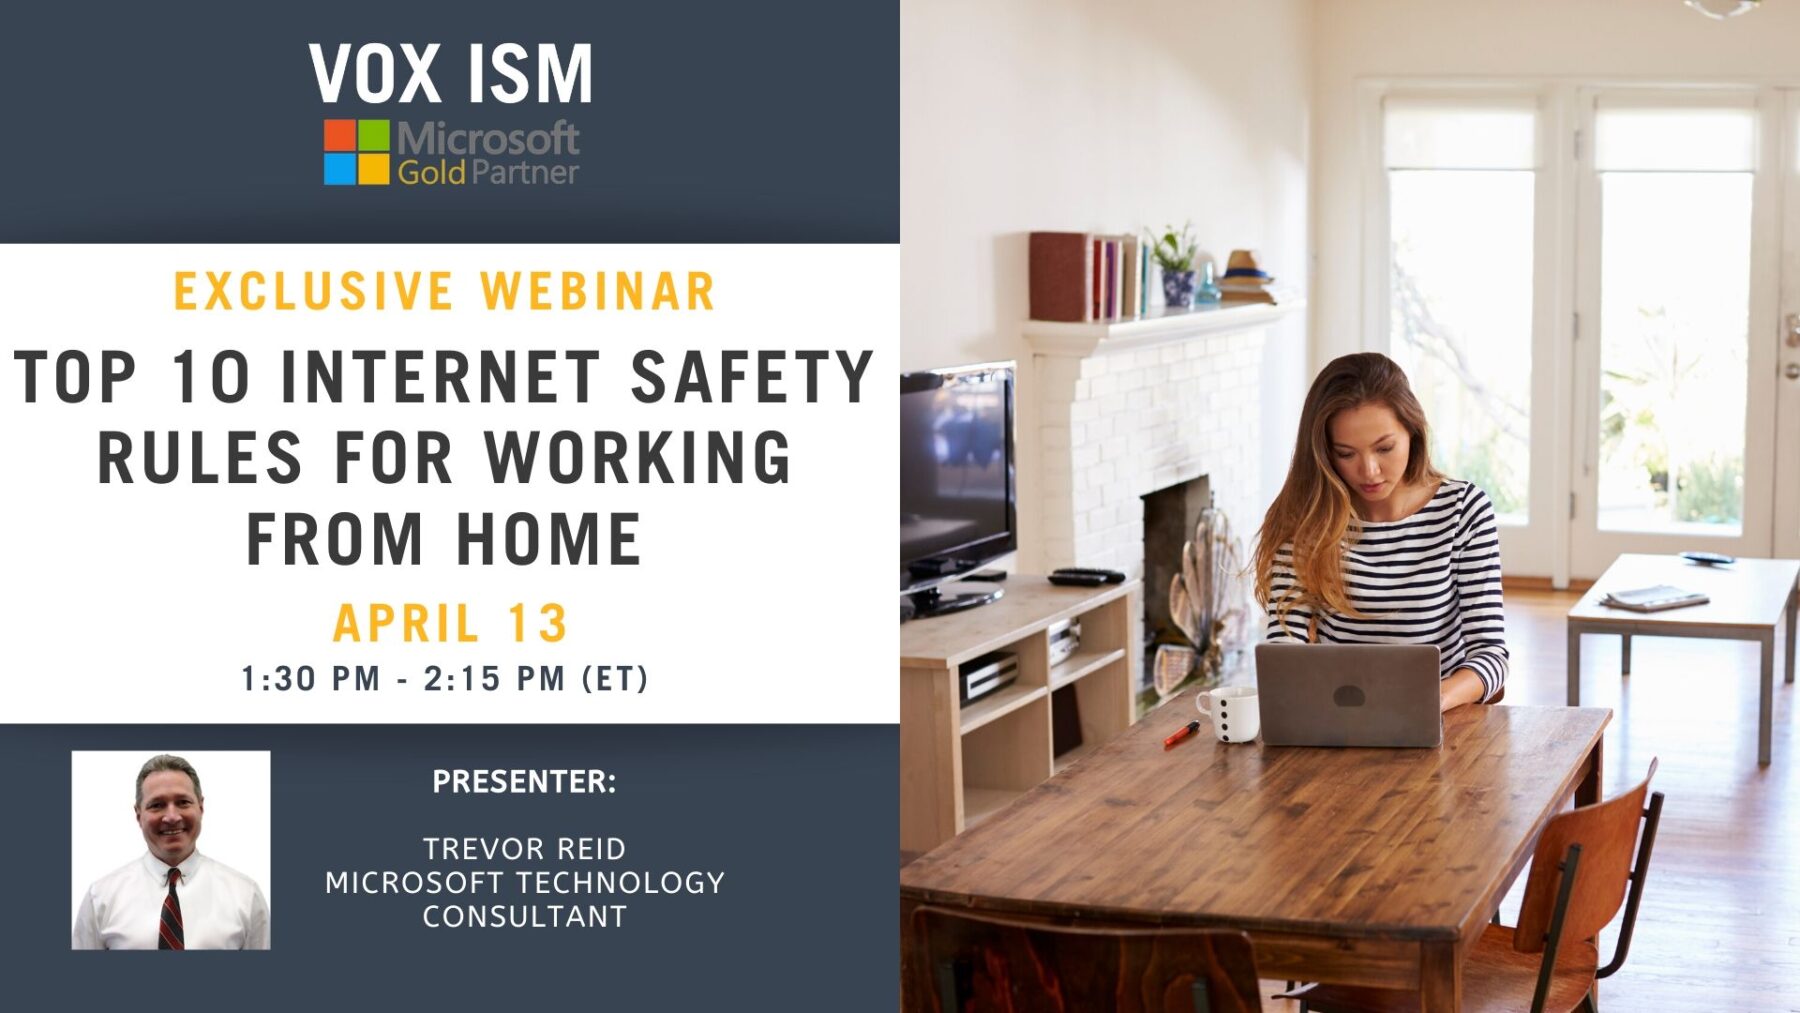 Top 10 Internet Safety Rules for Working From Home - April 13 - Webinar_VOX ISM